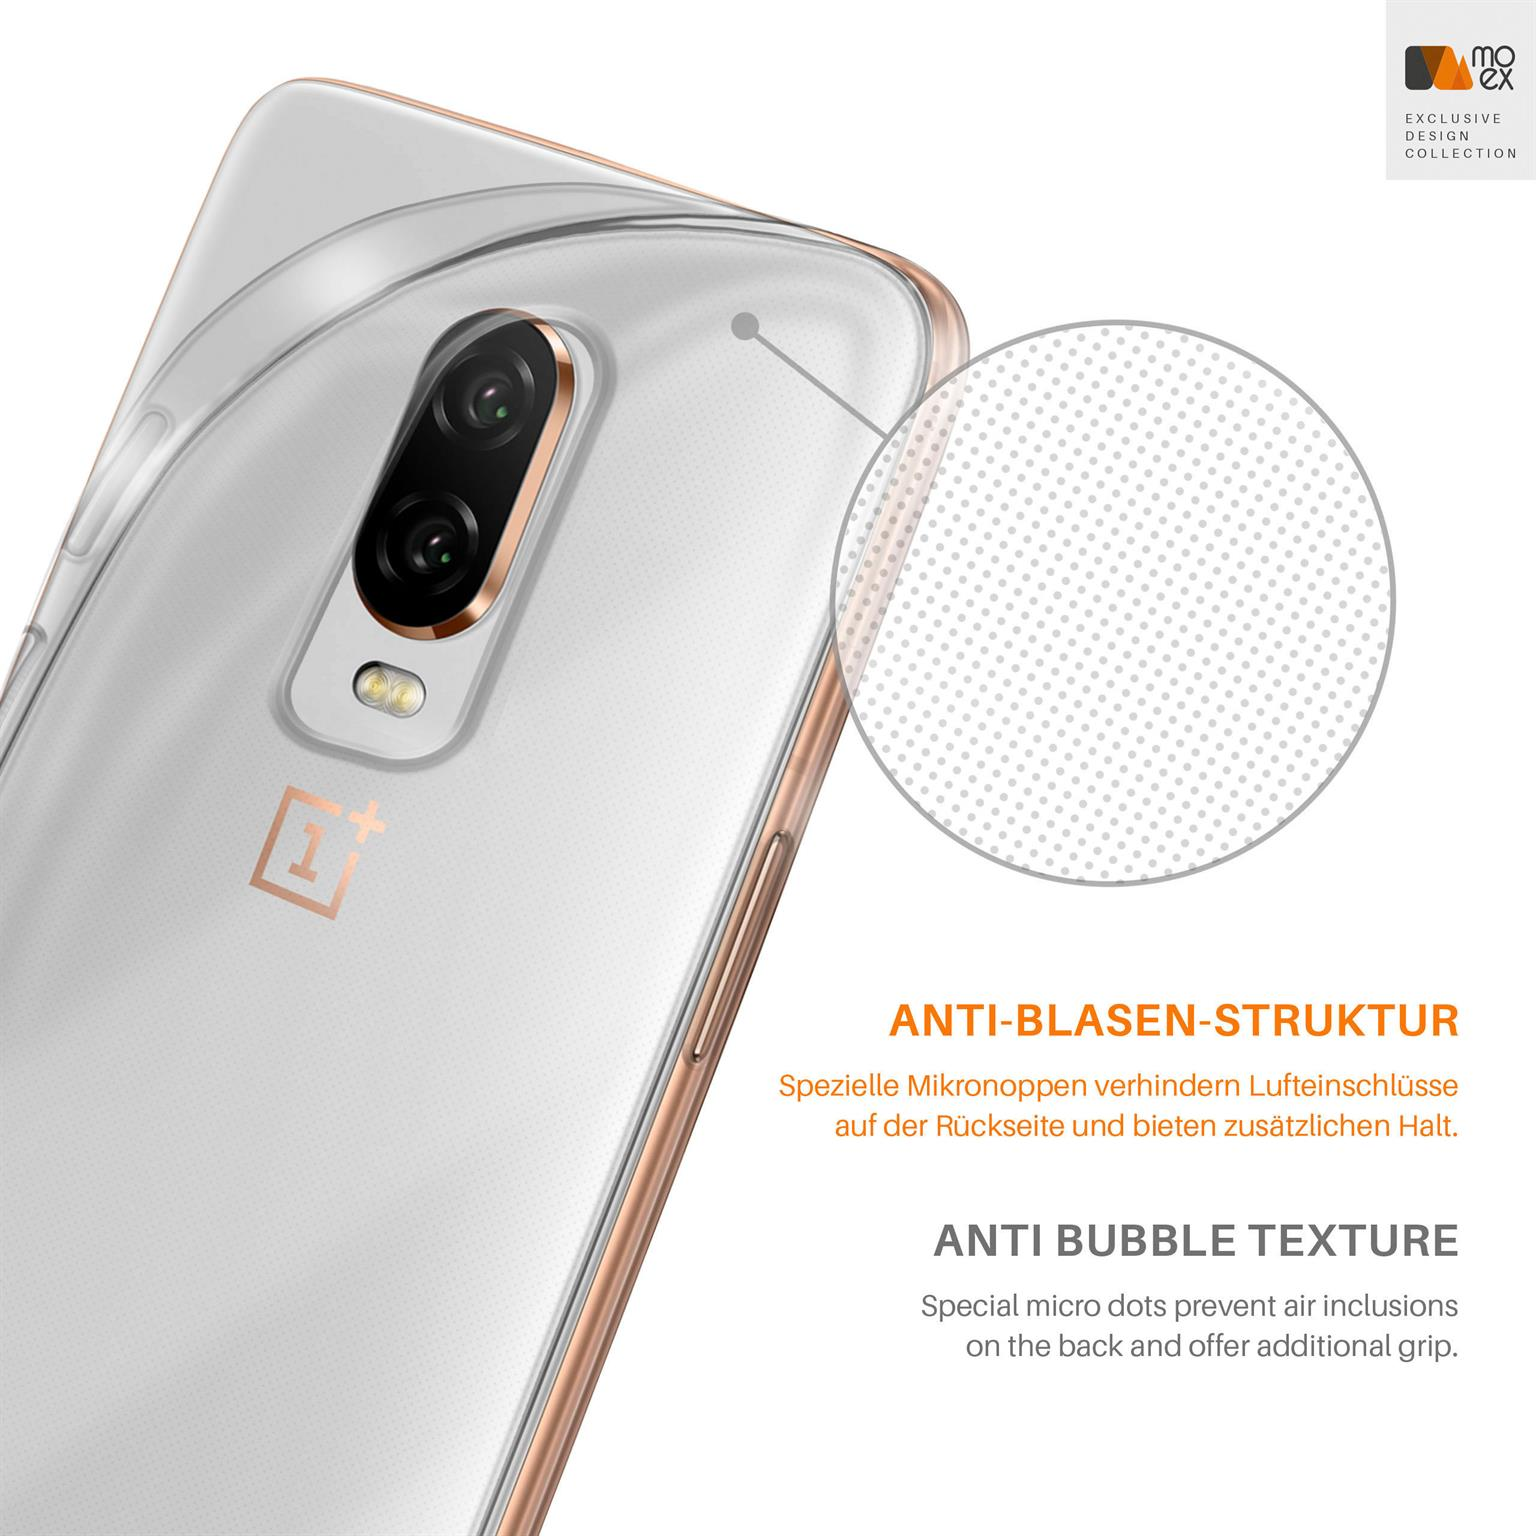 MOEX Aero Case, Backcover, OnePlus, Crystal-Clear 6T